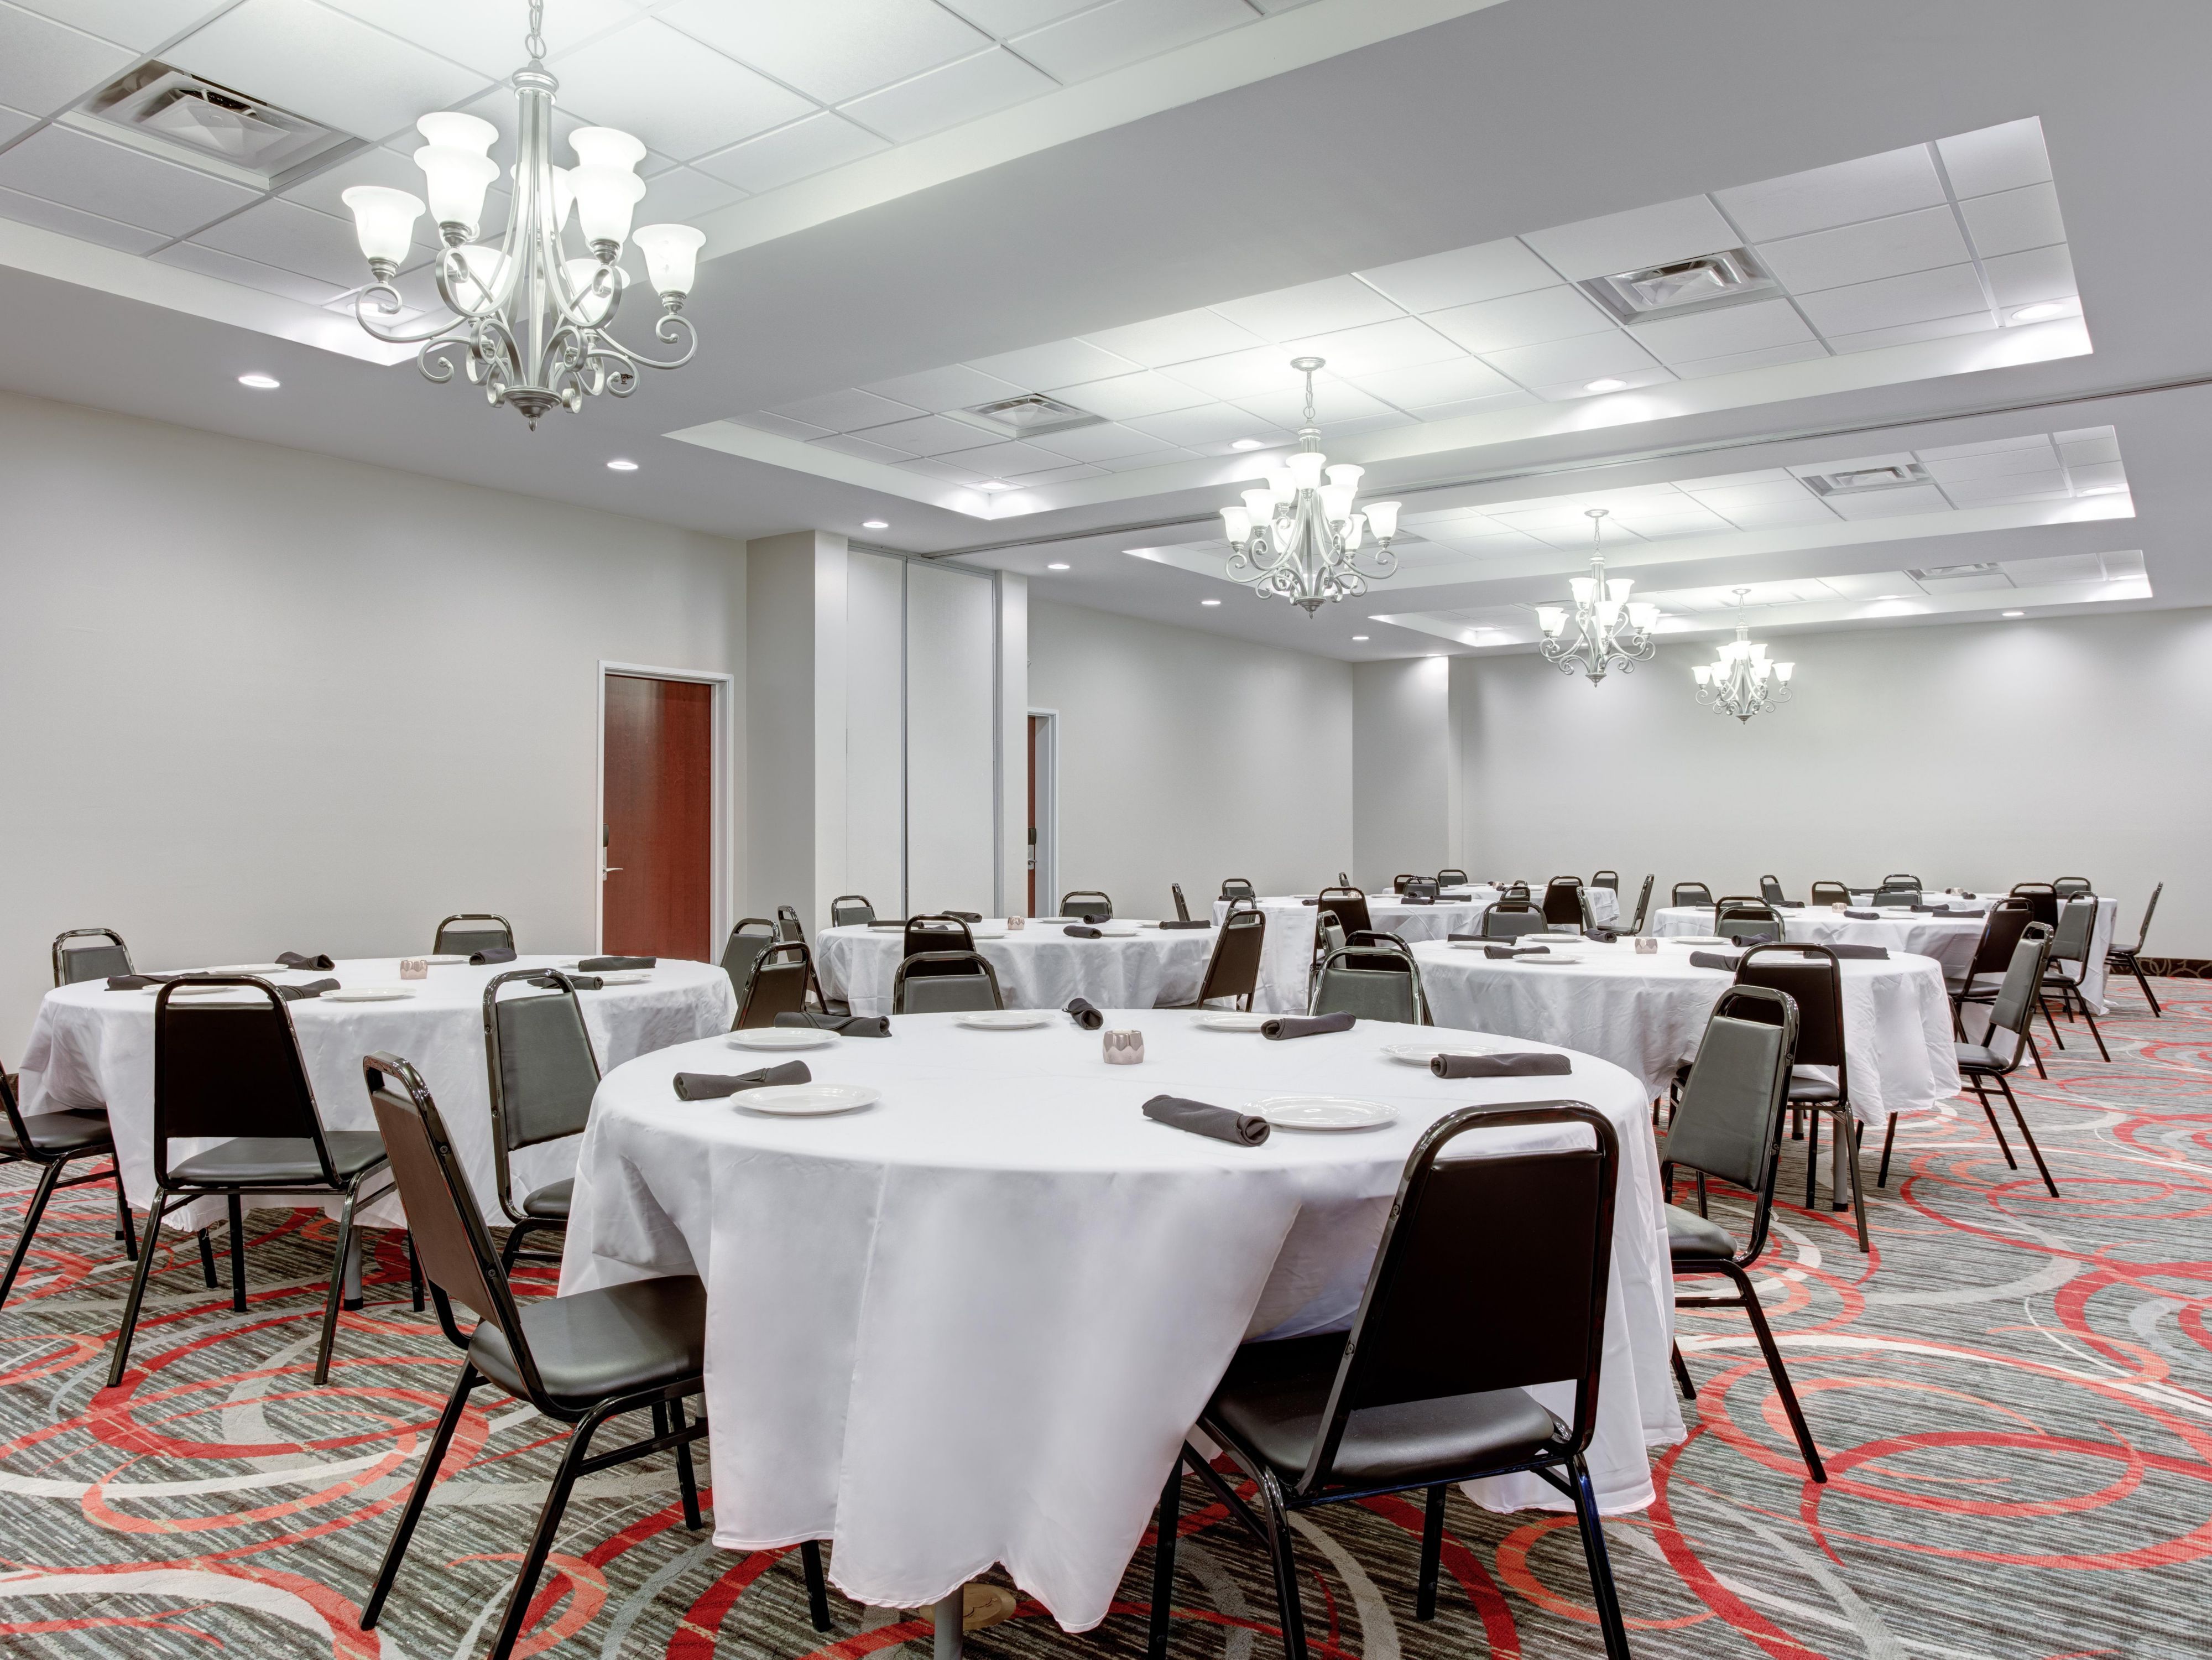 Located in the heart of Upper Lafayette, our 1760 sq ft space can accommodate all your meeting needs. Secluded in a quiet corner, our grand ballroom can seat up to 100 while our beautiful, open, pre-function area can handle your registration and exhibit needs. Treat attendees to a build your own buffet while our experienced staff take care of you.